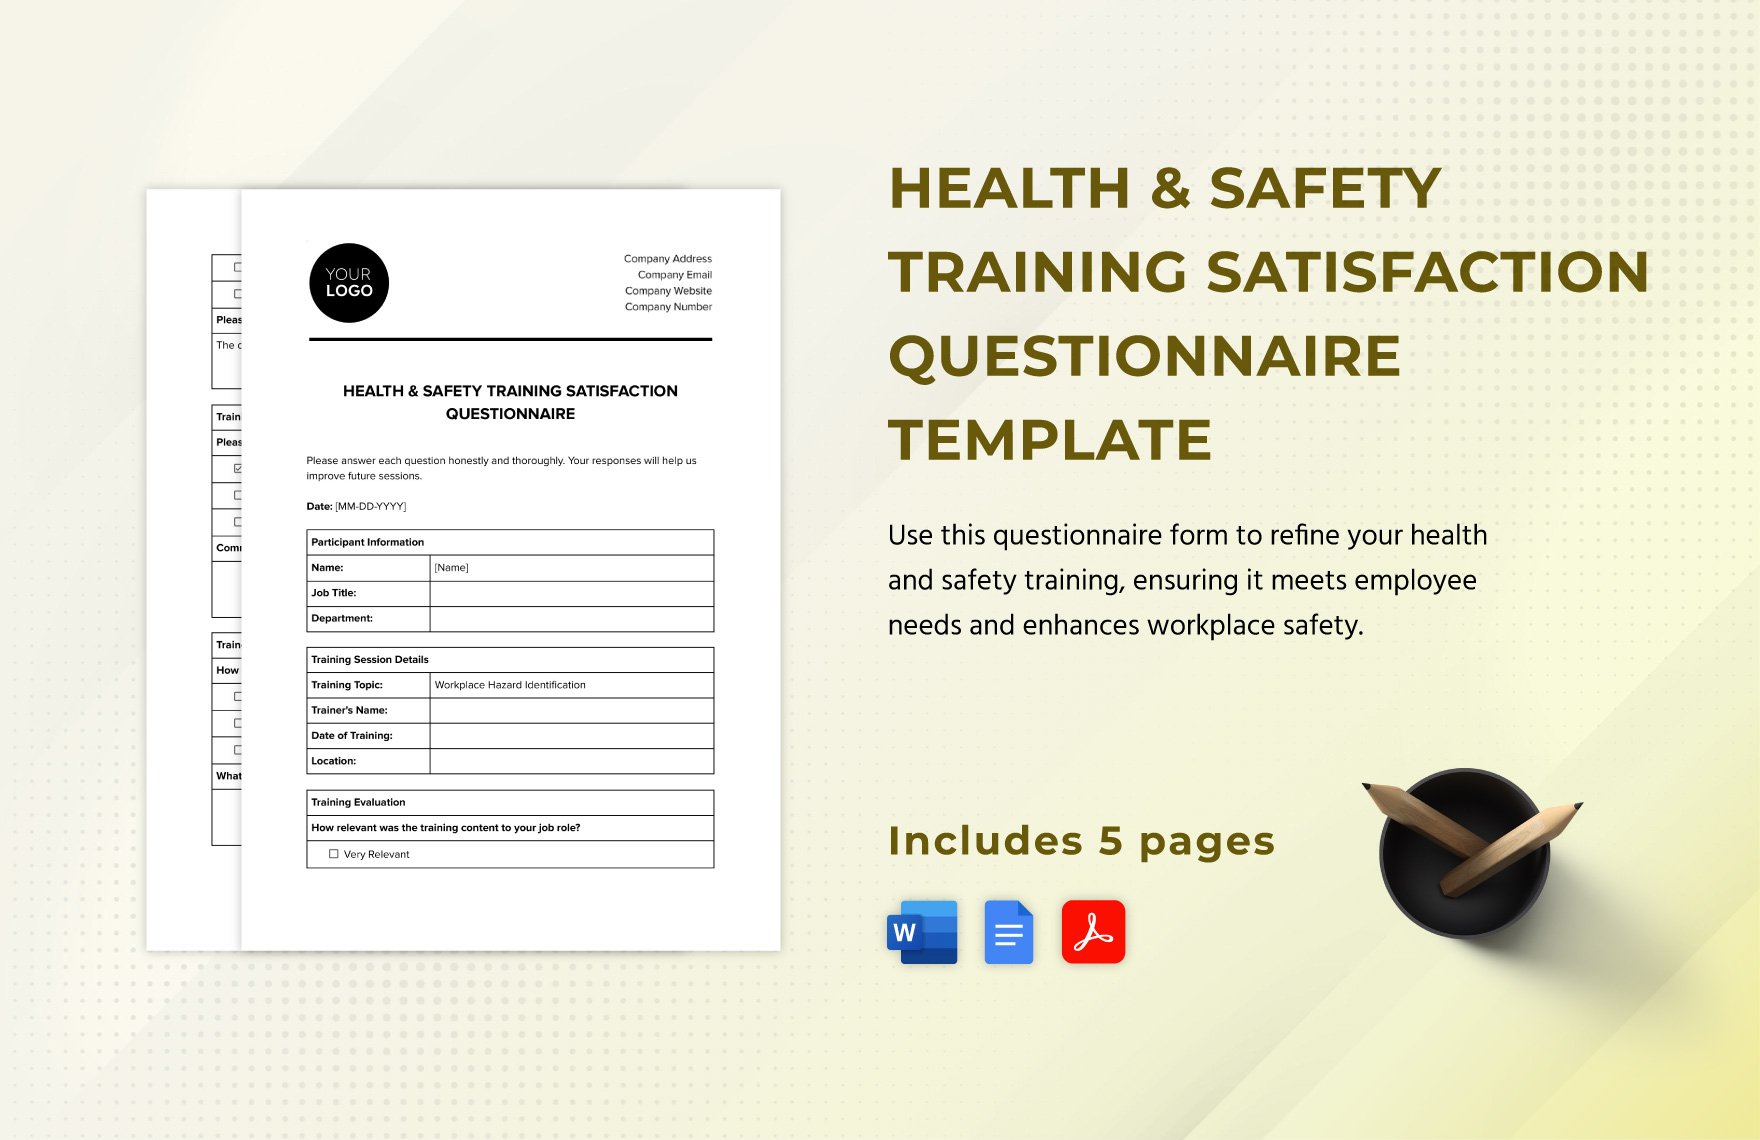 Health & Safety Training Satisfaction Questionnaire Template in Word, Google Docs, PDF